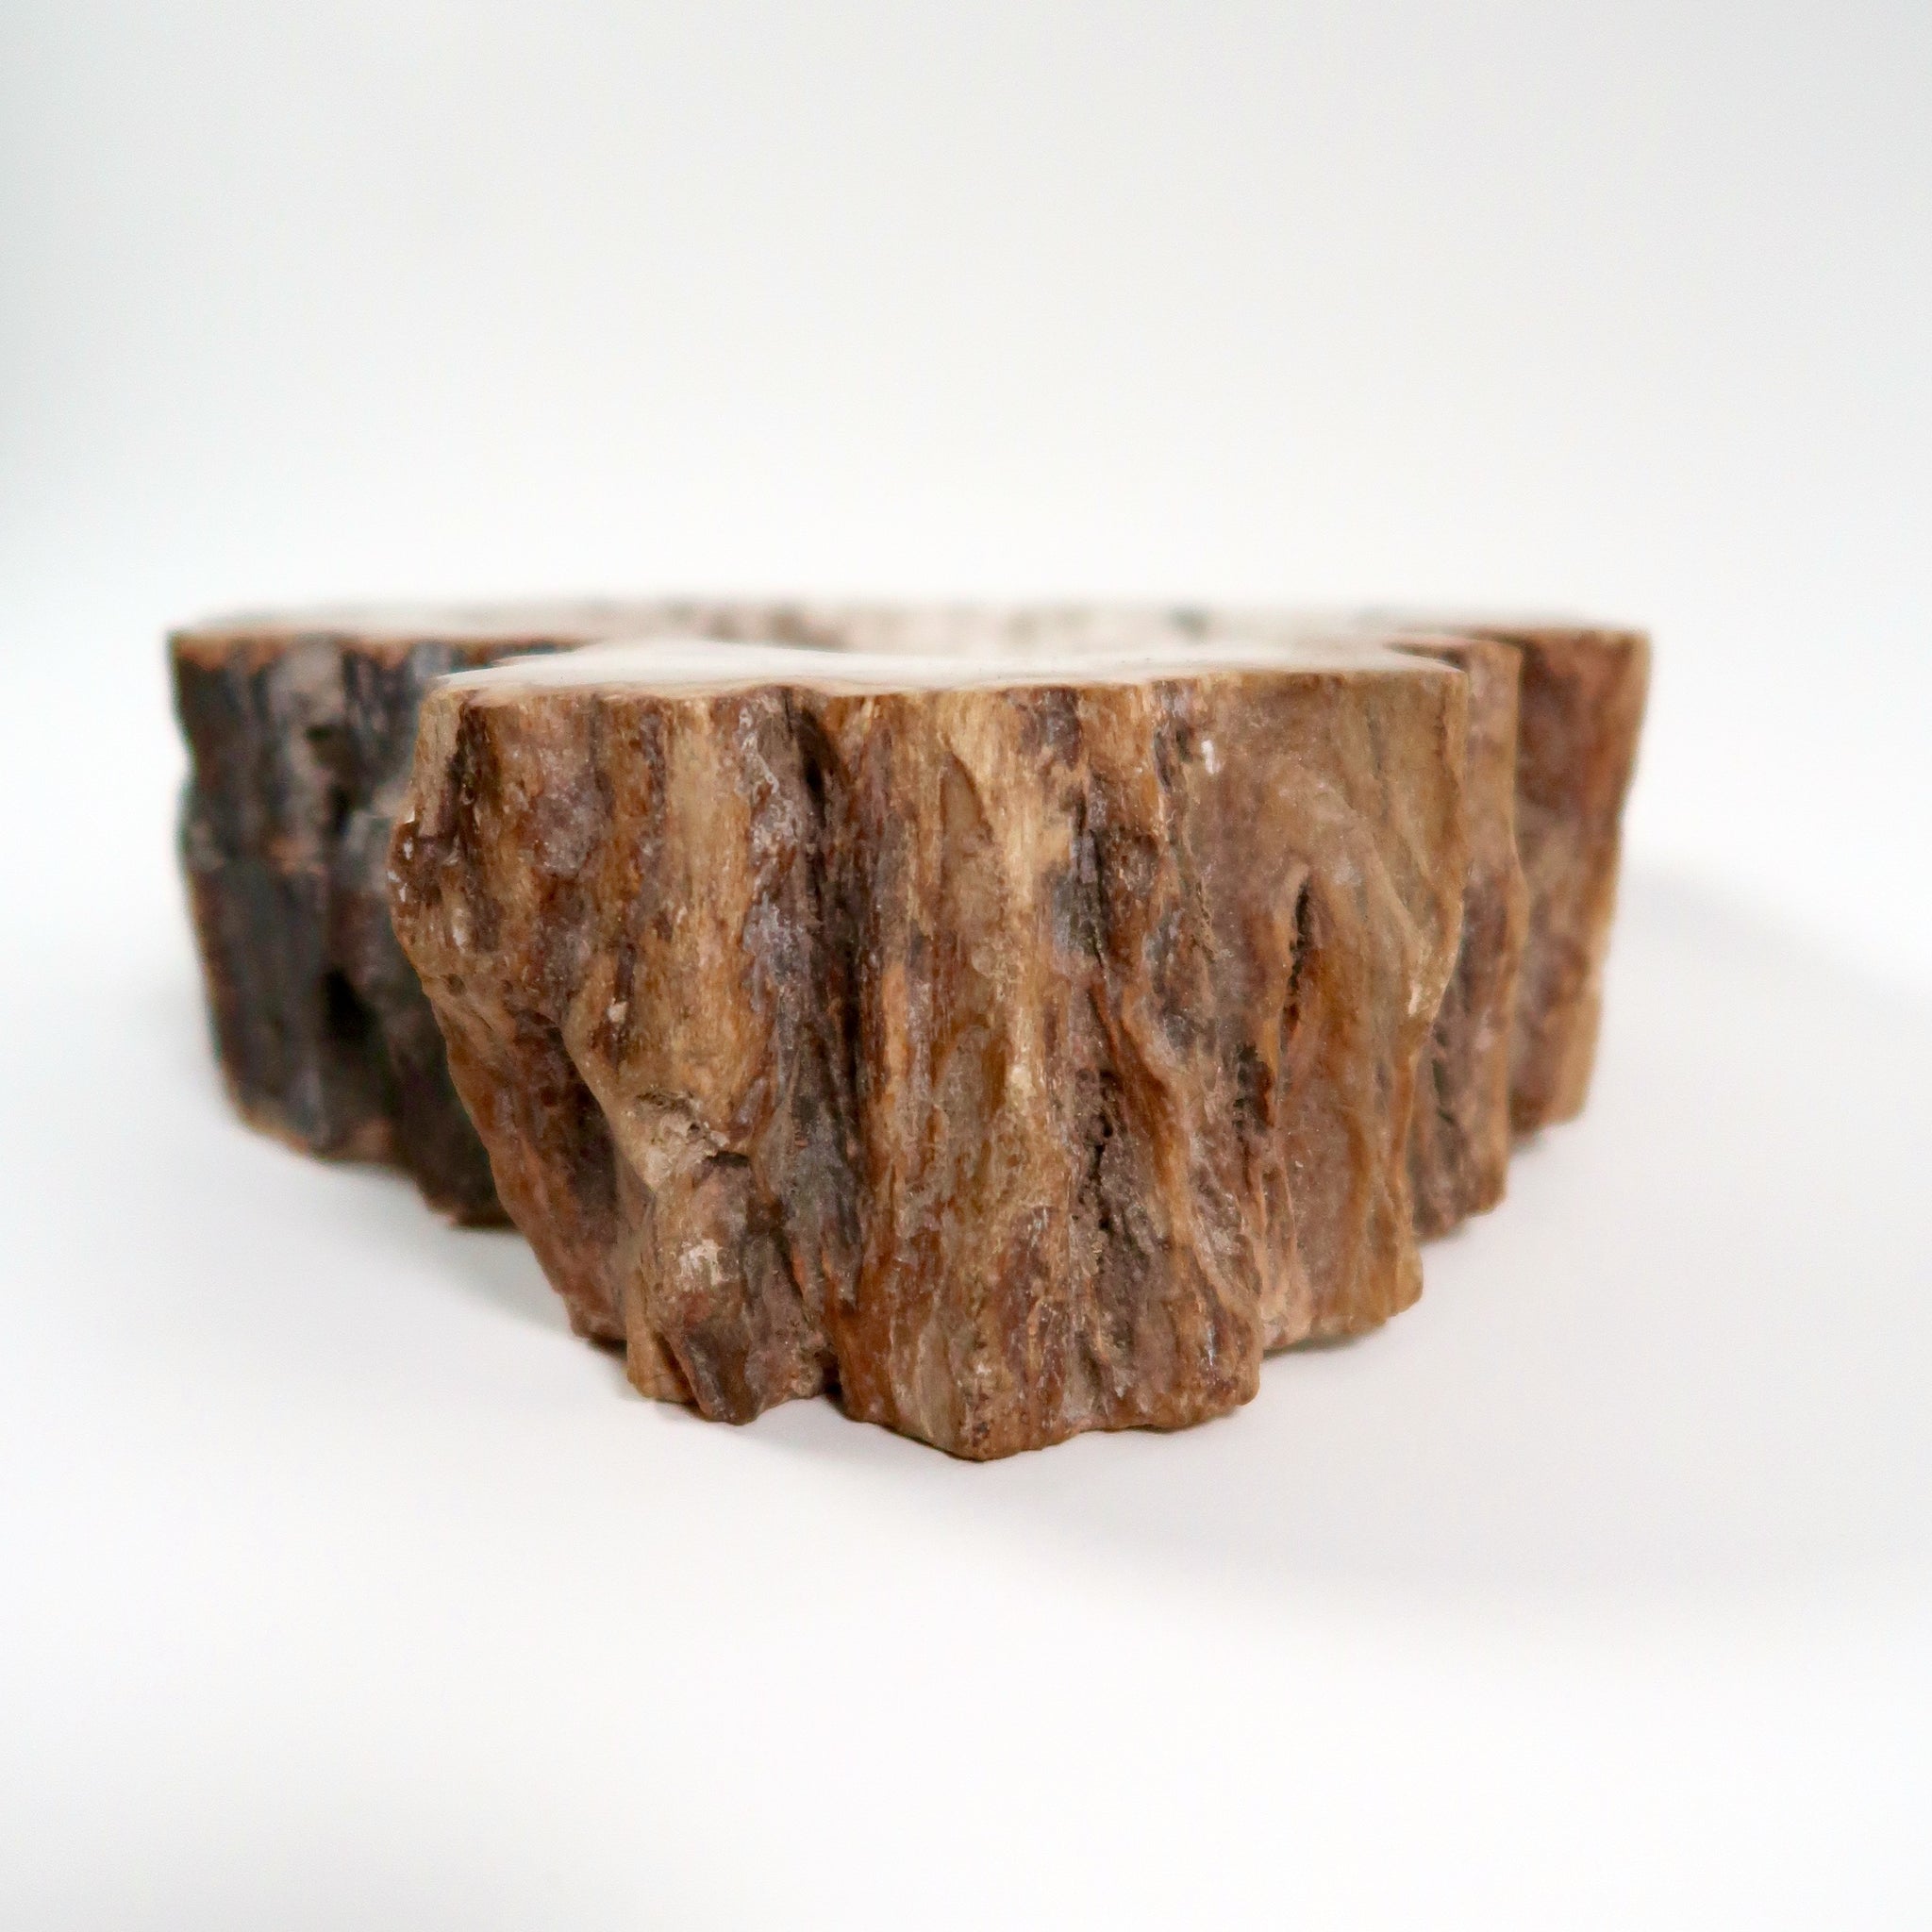 Superb petrified wood bowl from the late tertiary period